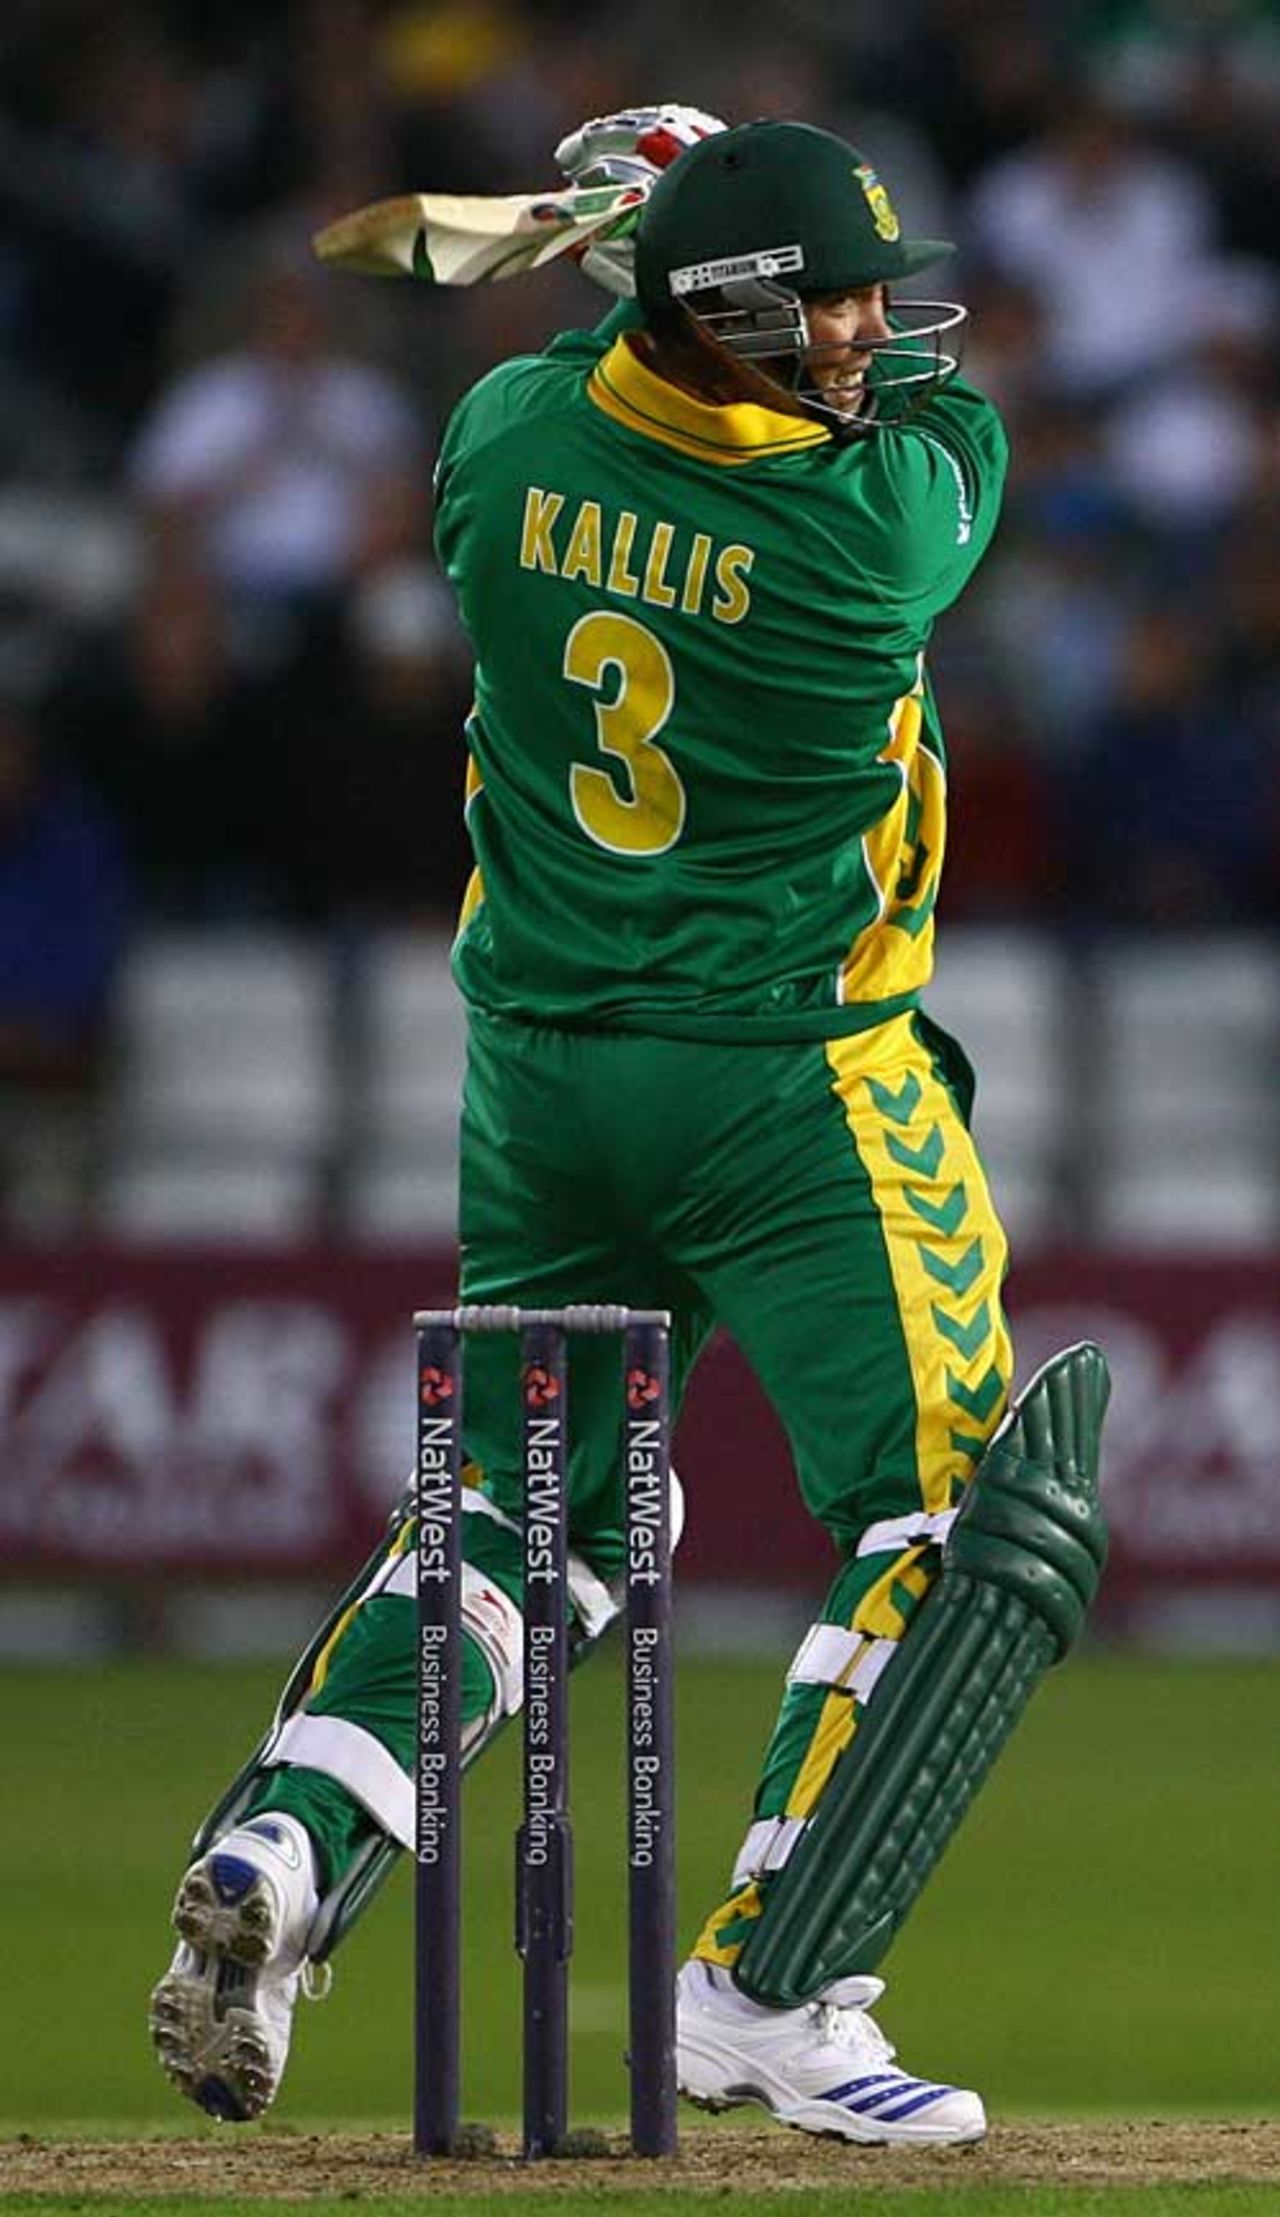 Jacques Kallis cuts strongly during his half century, England v South Africa, 1st ODI, Headingley, August 22, 2008